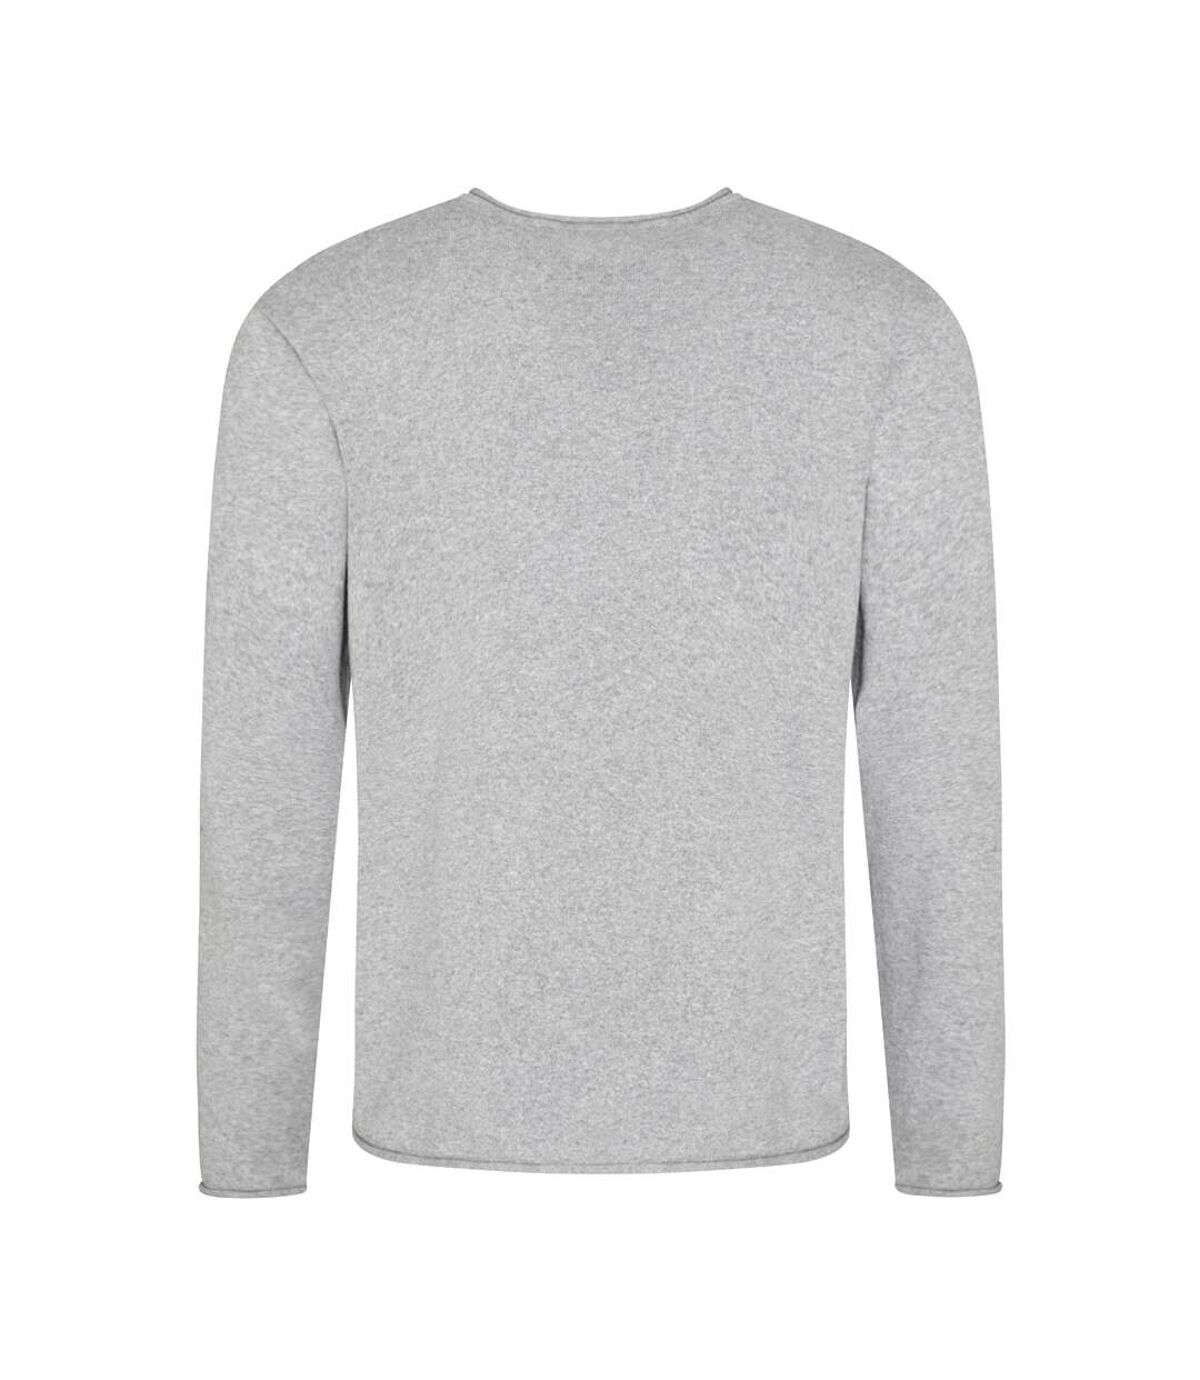 Ecologie - Pull ARENAL - Homme (Gris clair) - UTPC3064